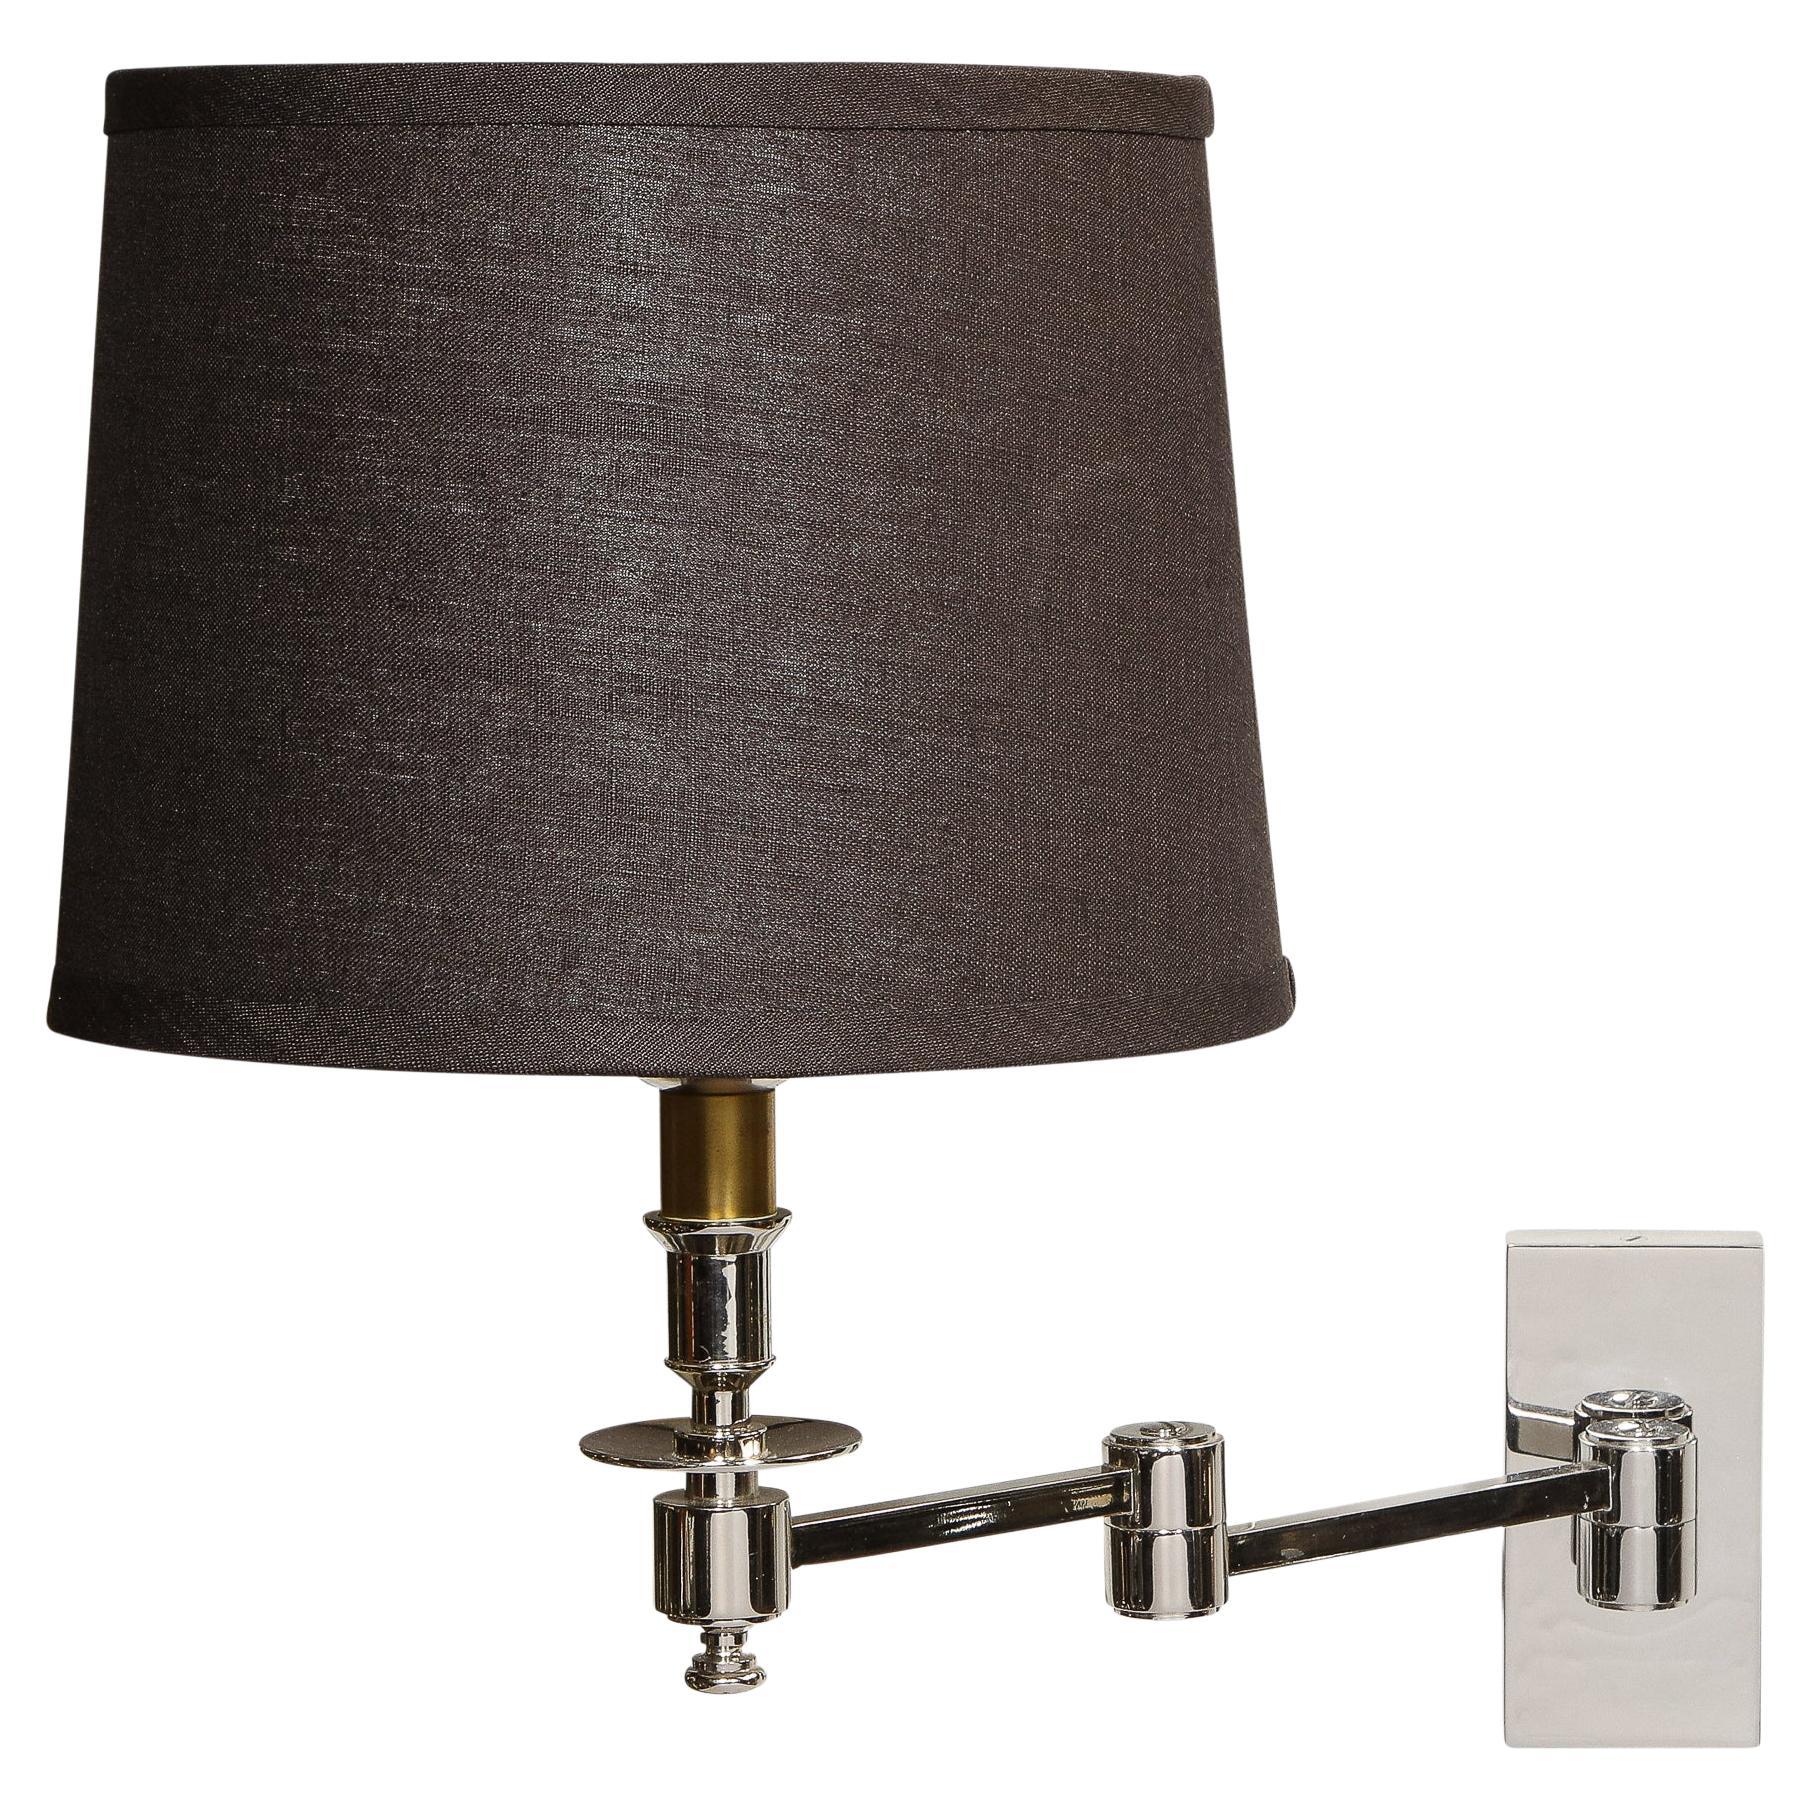 Mid-Century Modern Extendable Cantlivering Polished Nickel Wall Sconce For Sale